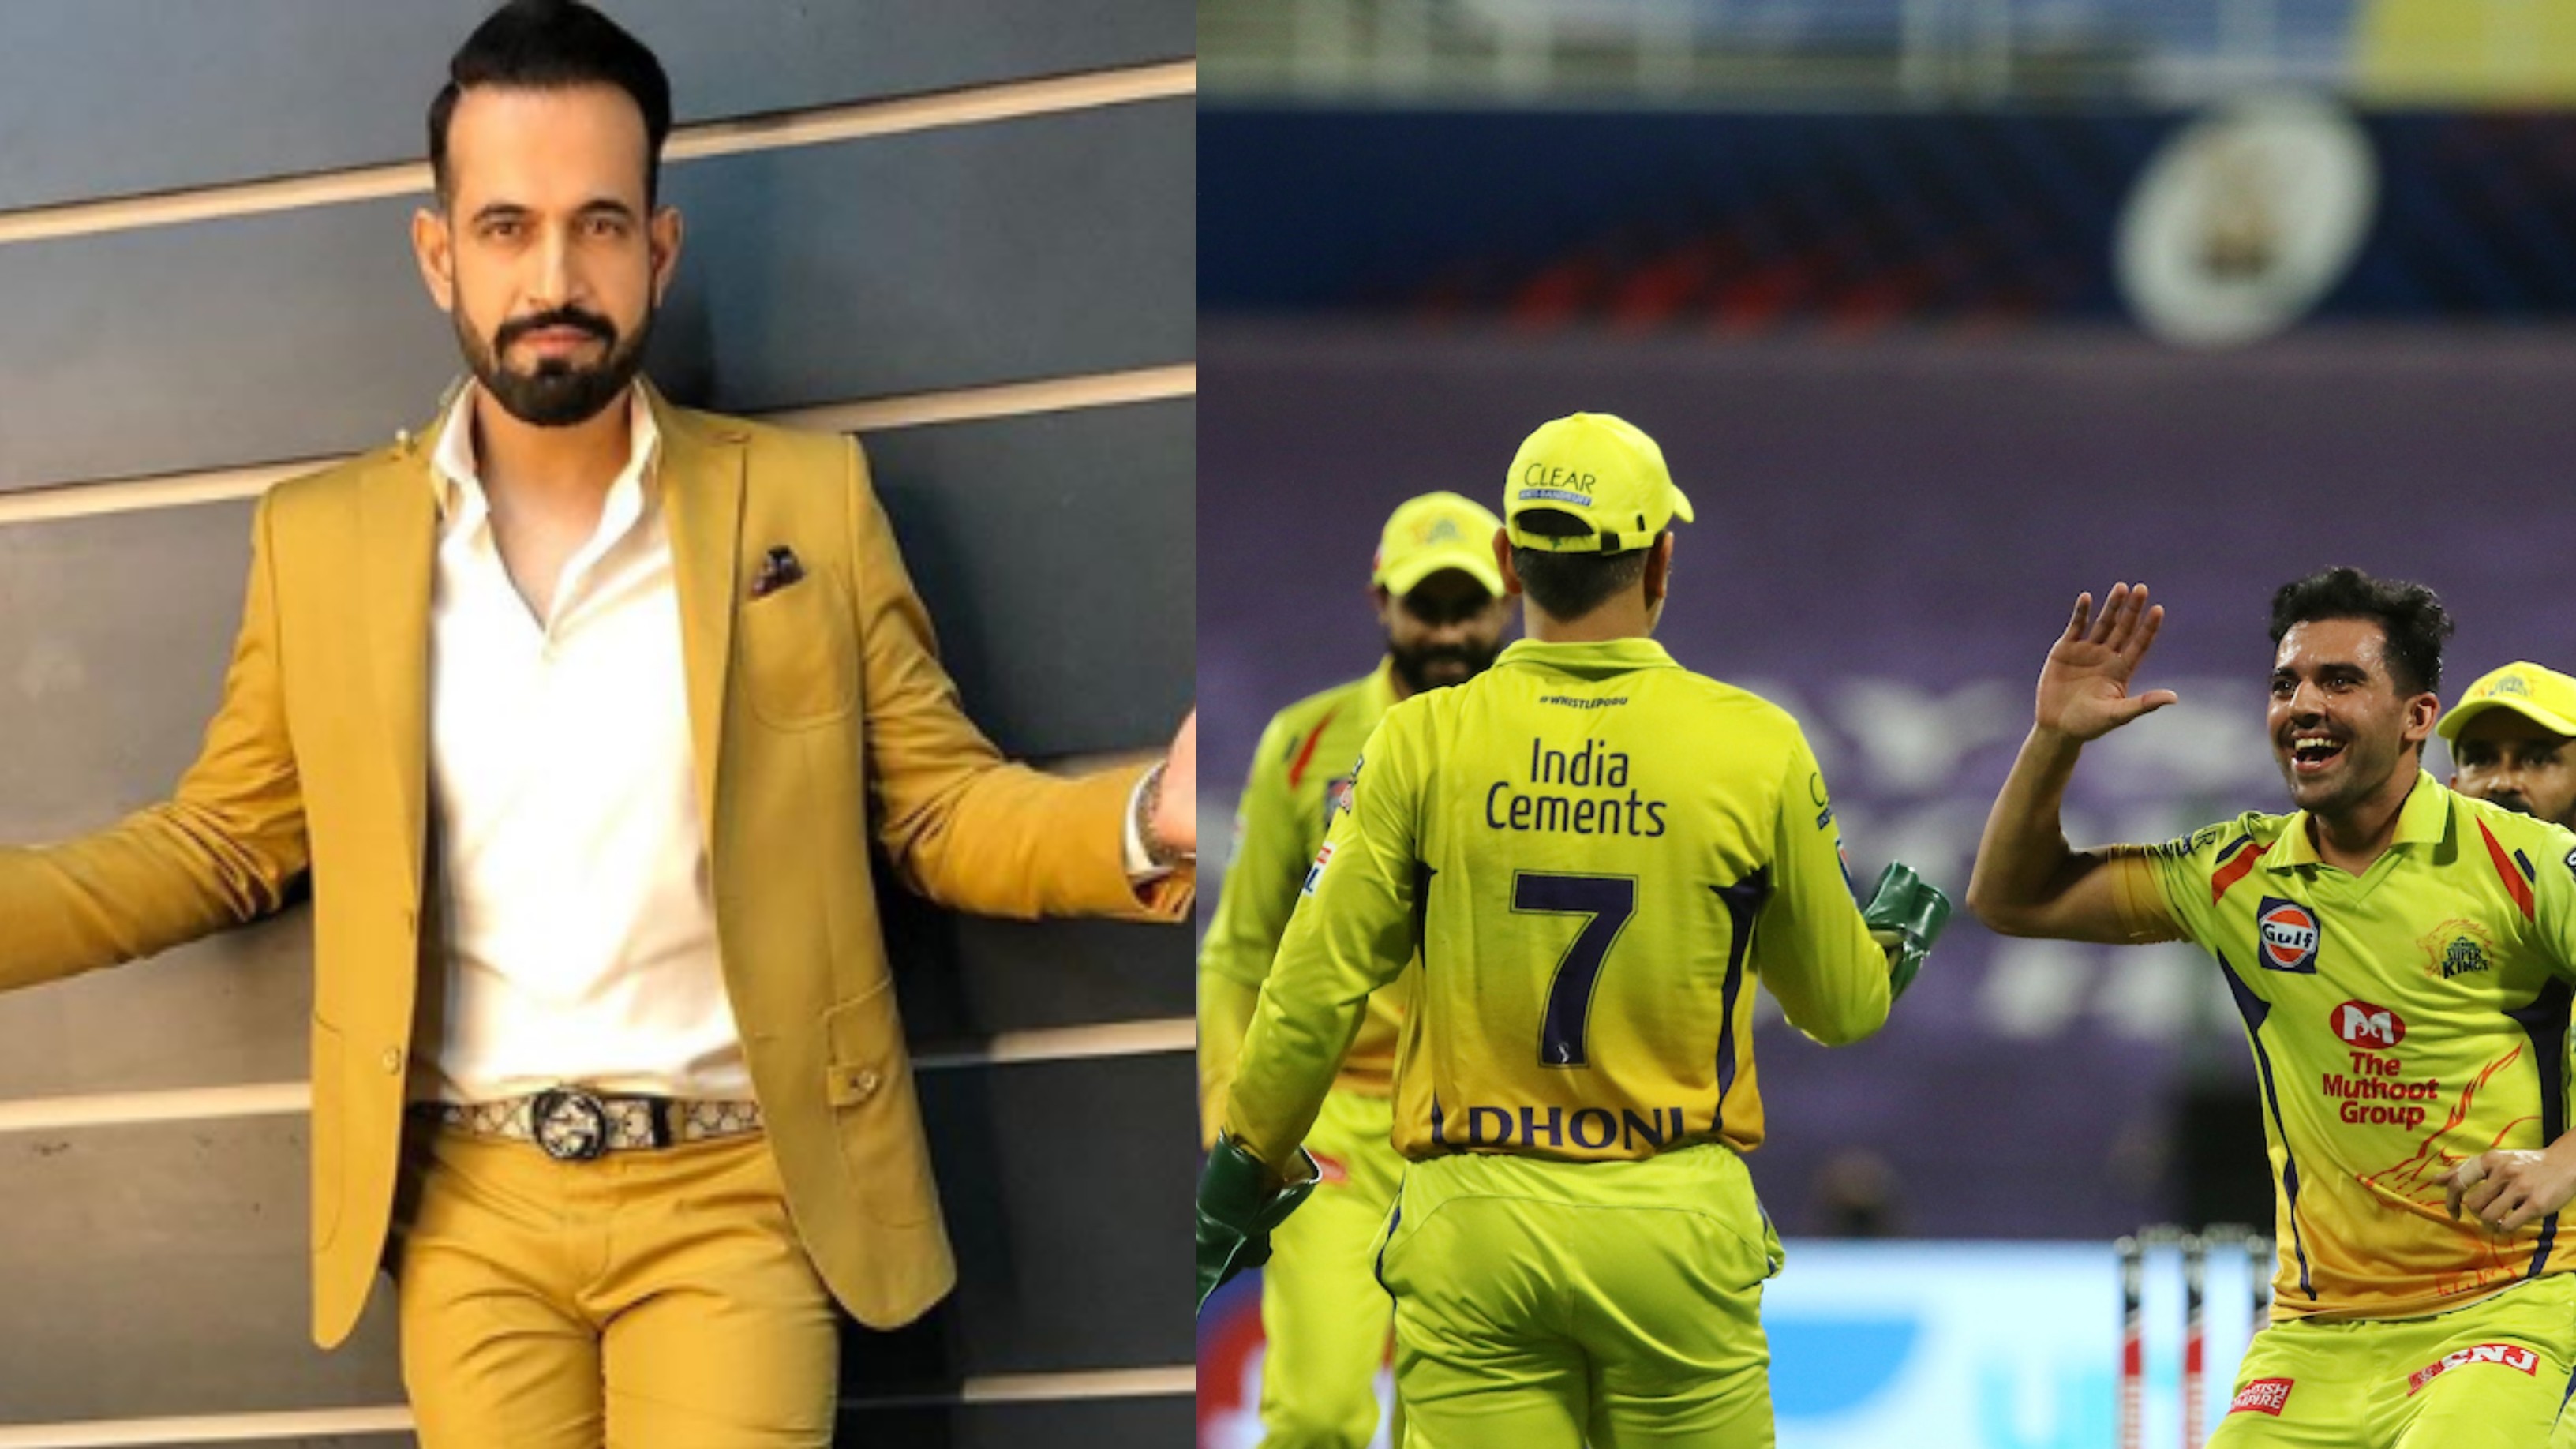 IPL 2020: MS Dhoni-led CSK can still bounce back stronger, feels Irfan Pathan